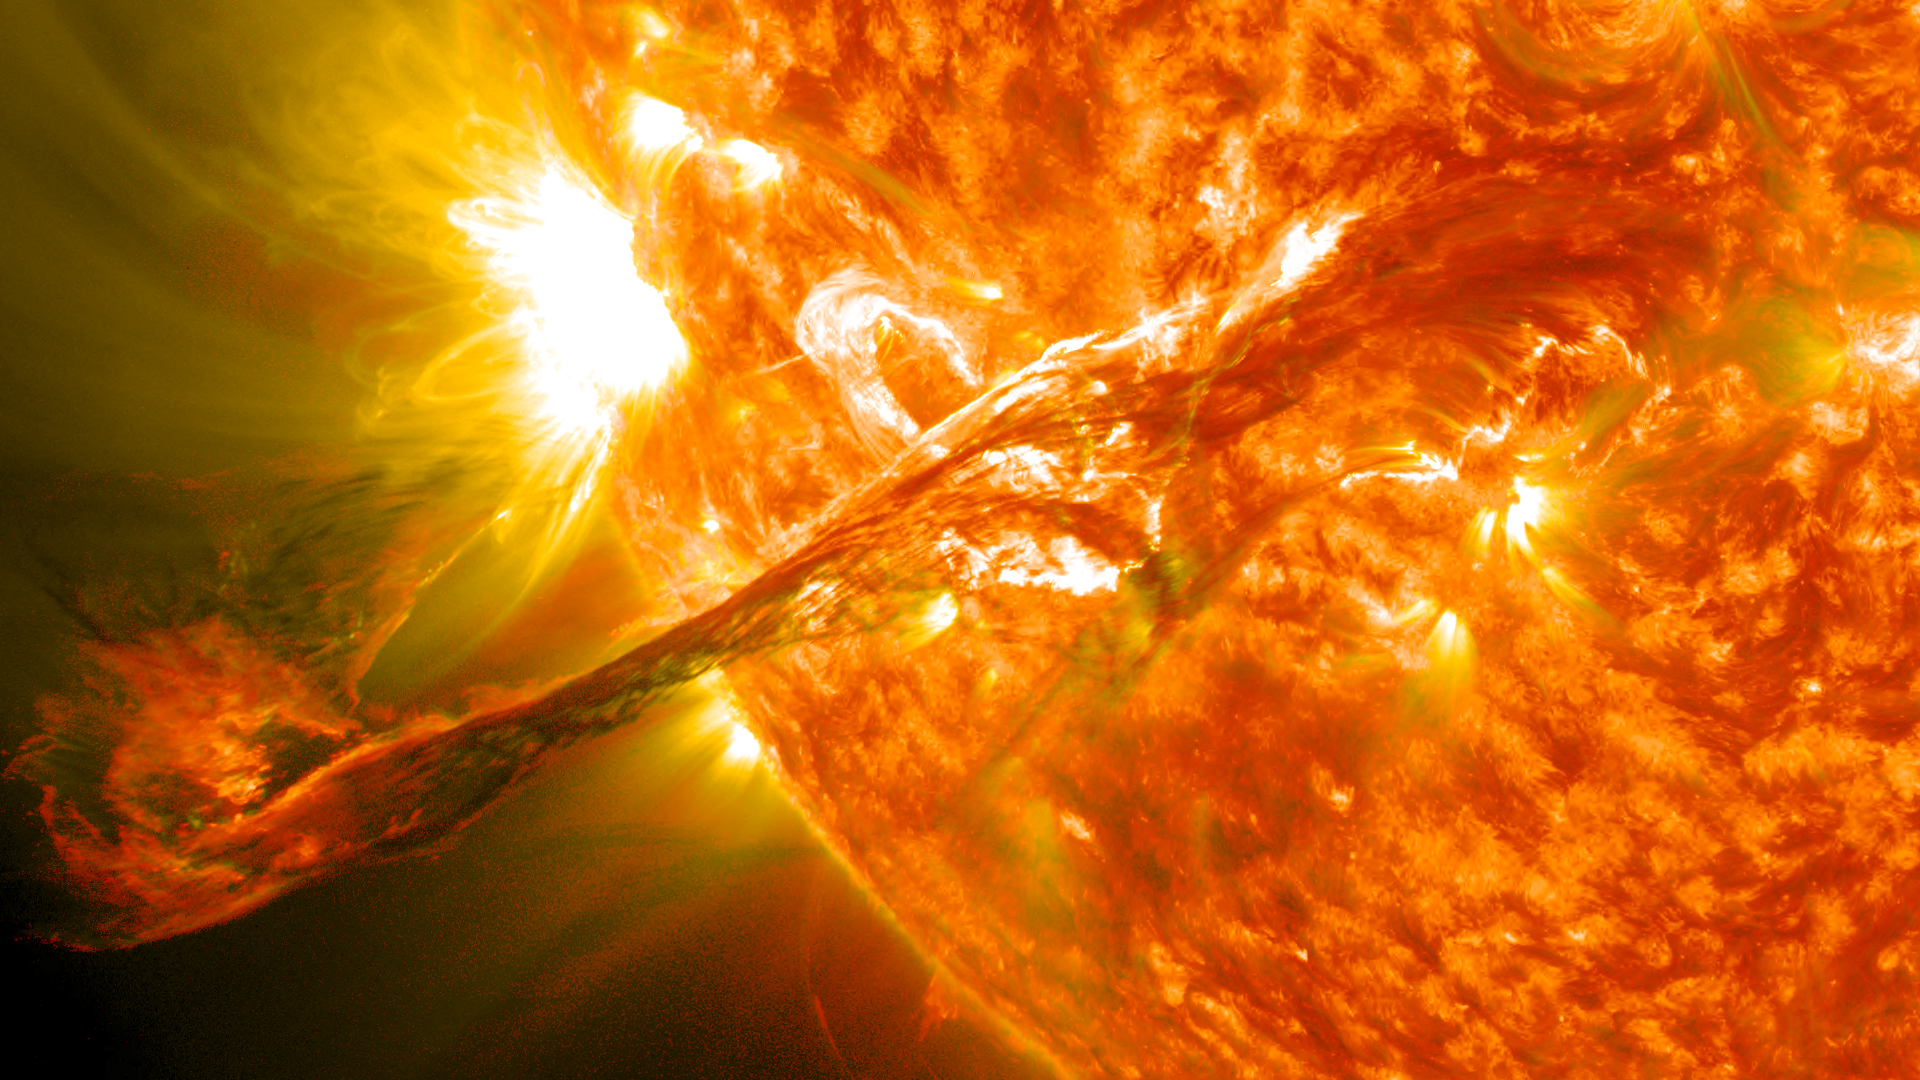 A coronal mass ejection is a mass of ionized gas released from the Sun. https:/commons.wikimedia.org/wiki/File:Magnificent_CME_Erupts_on_the_Sun_-_August_31.jpg; 